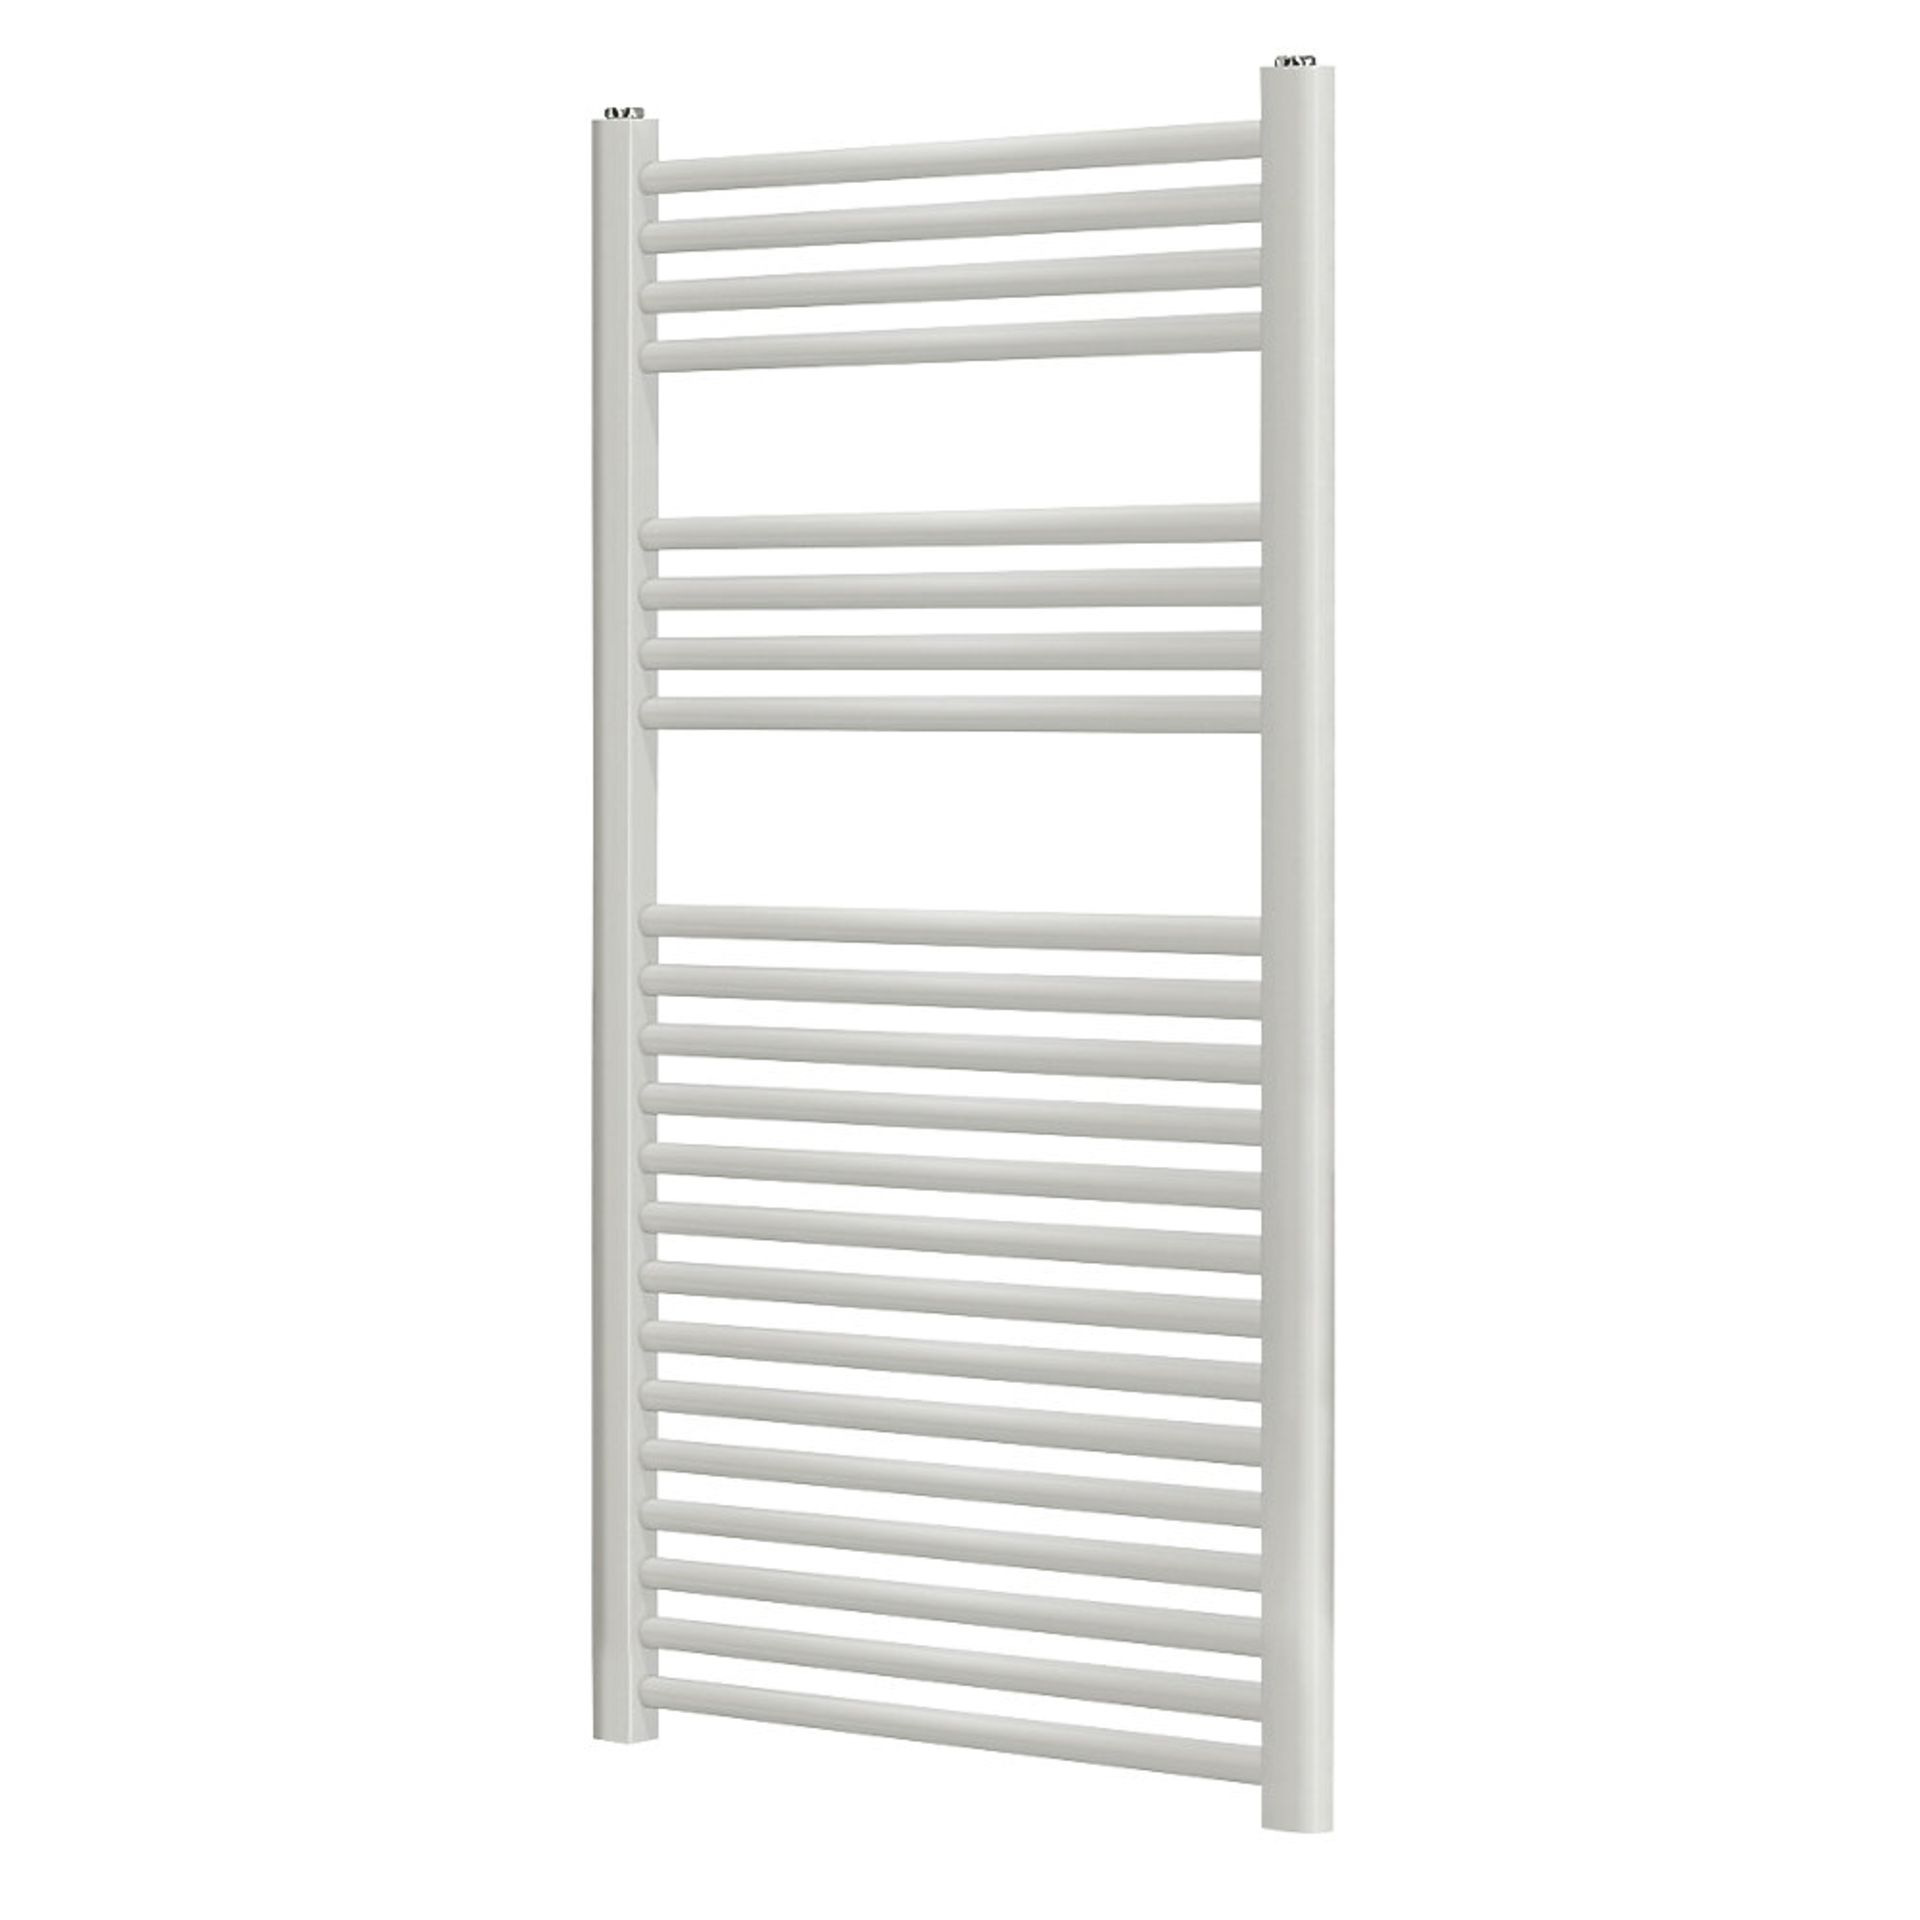 (WG294) TOWEL RADIATOR 1100 X 500MM WHITE. High quality steel construction with a matt white finish.